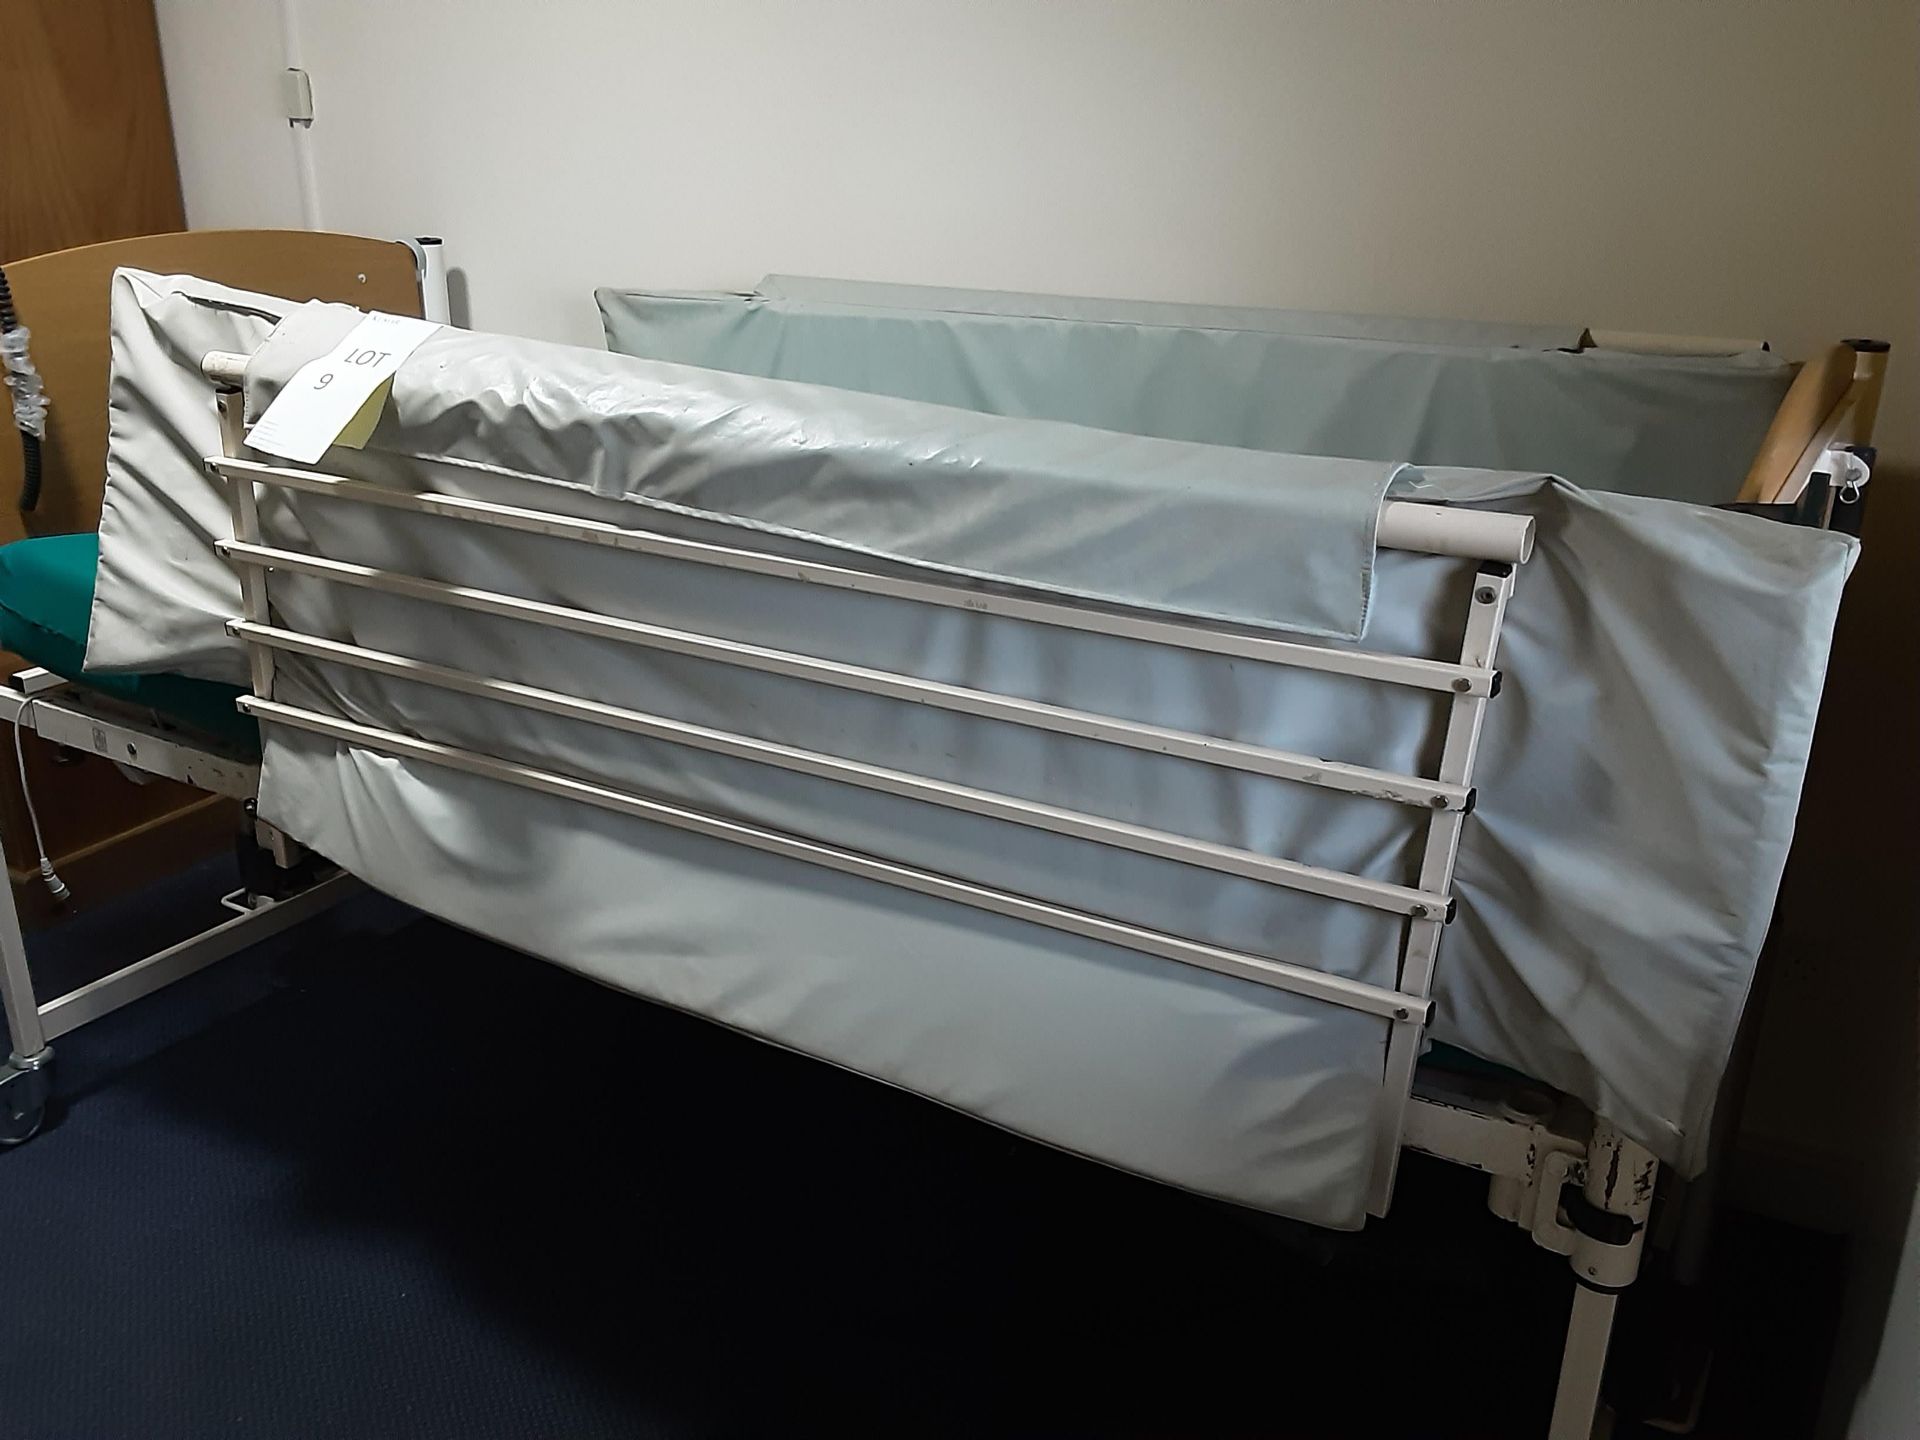 Accora Innovators In Care Single Motorised Bed With Padding - Image 2 of 9